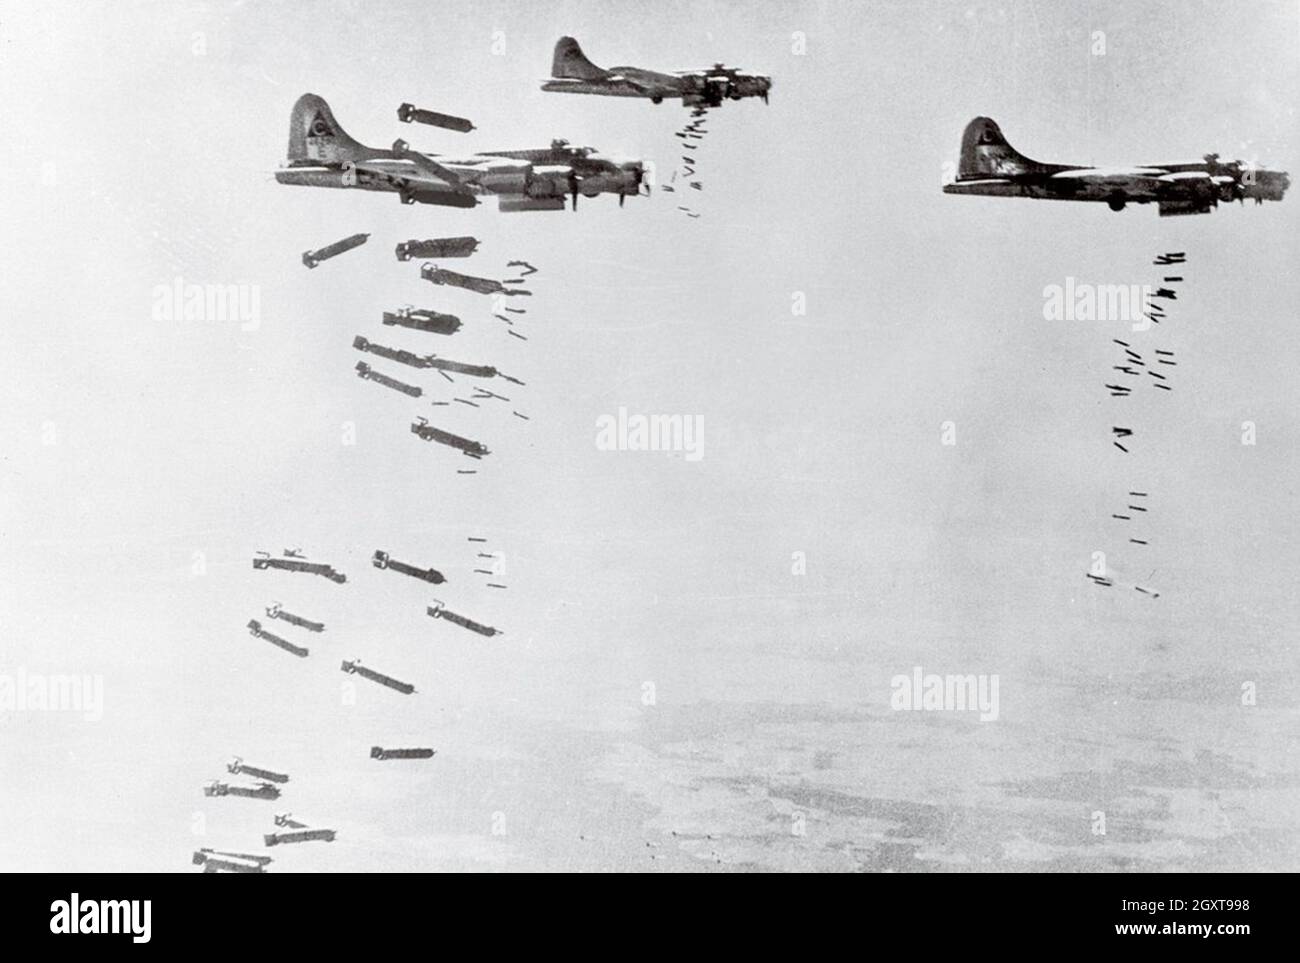 Boeing B-17 Flying Fortress bombers area bombing German cities  by radar during the combined Allied strategic bombing campaign. The USAF bombed by day and the RAF bombed by night. Stock Photo